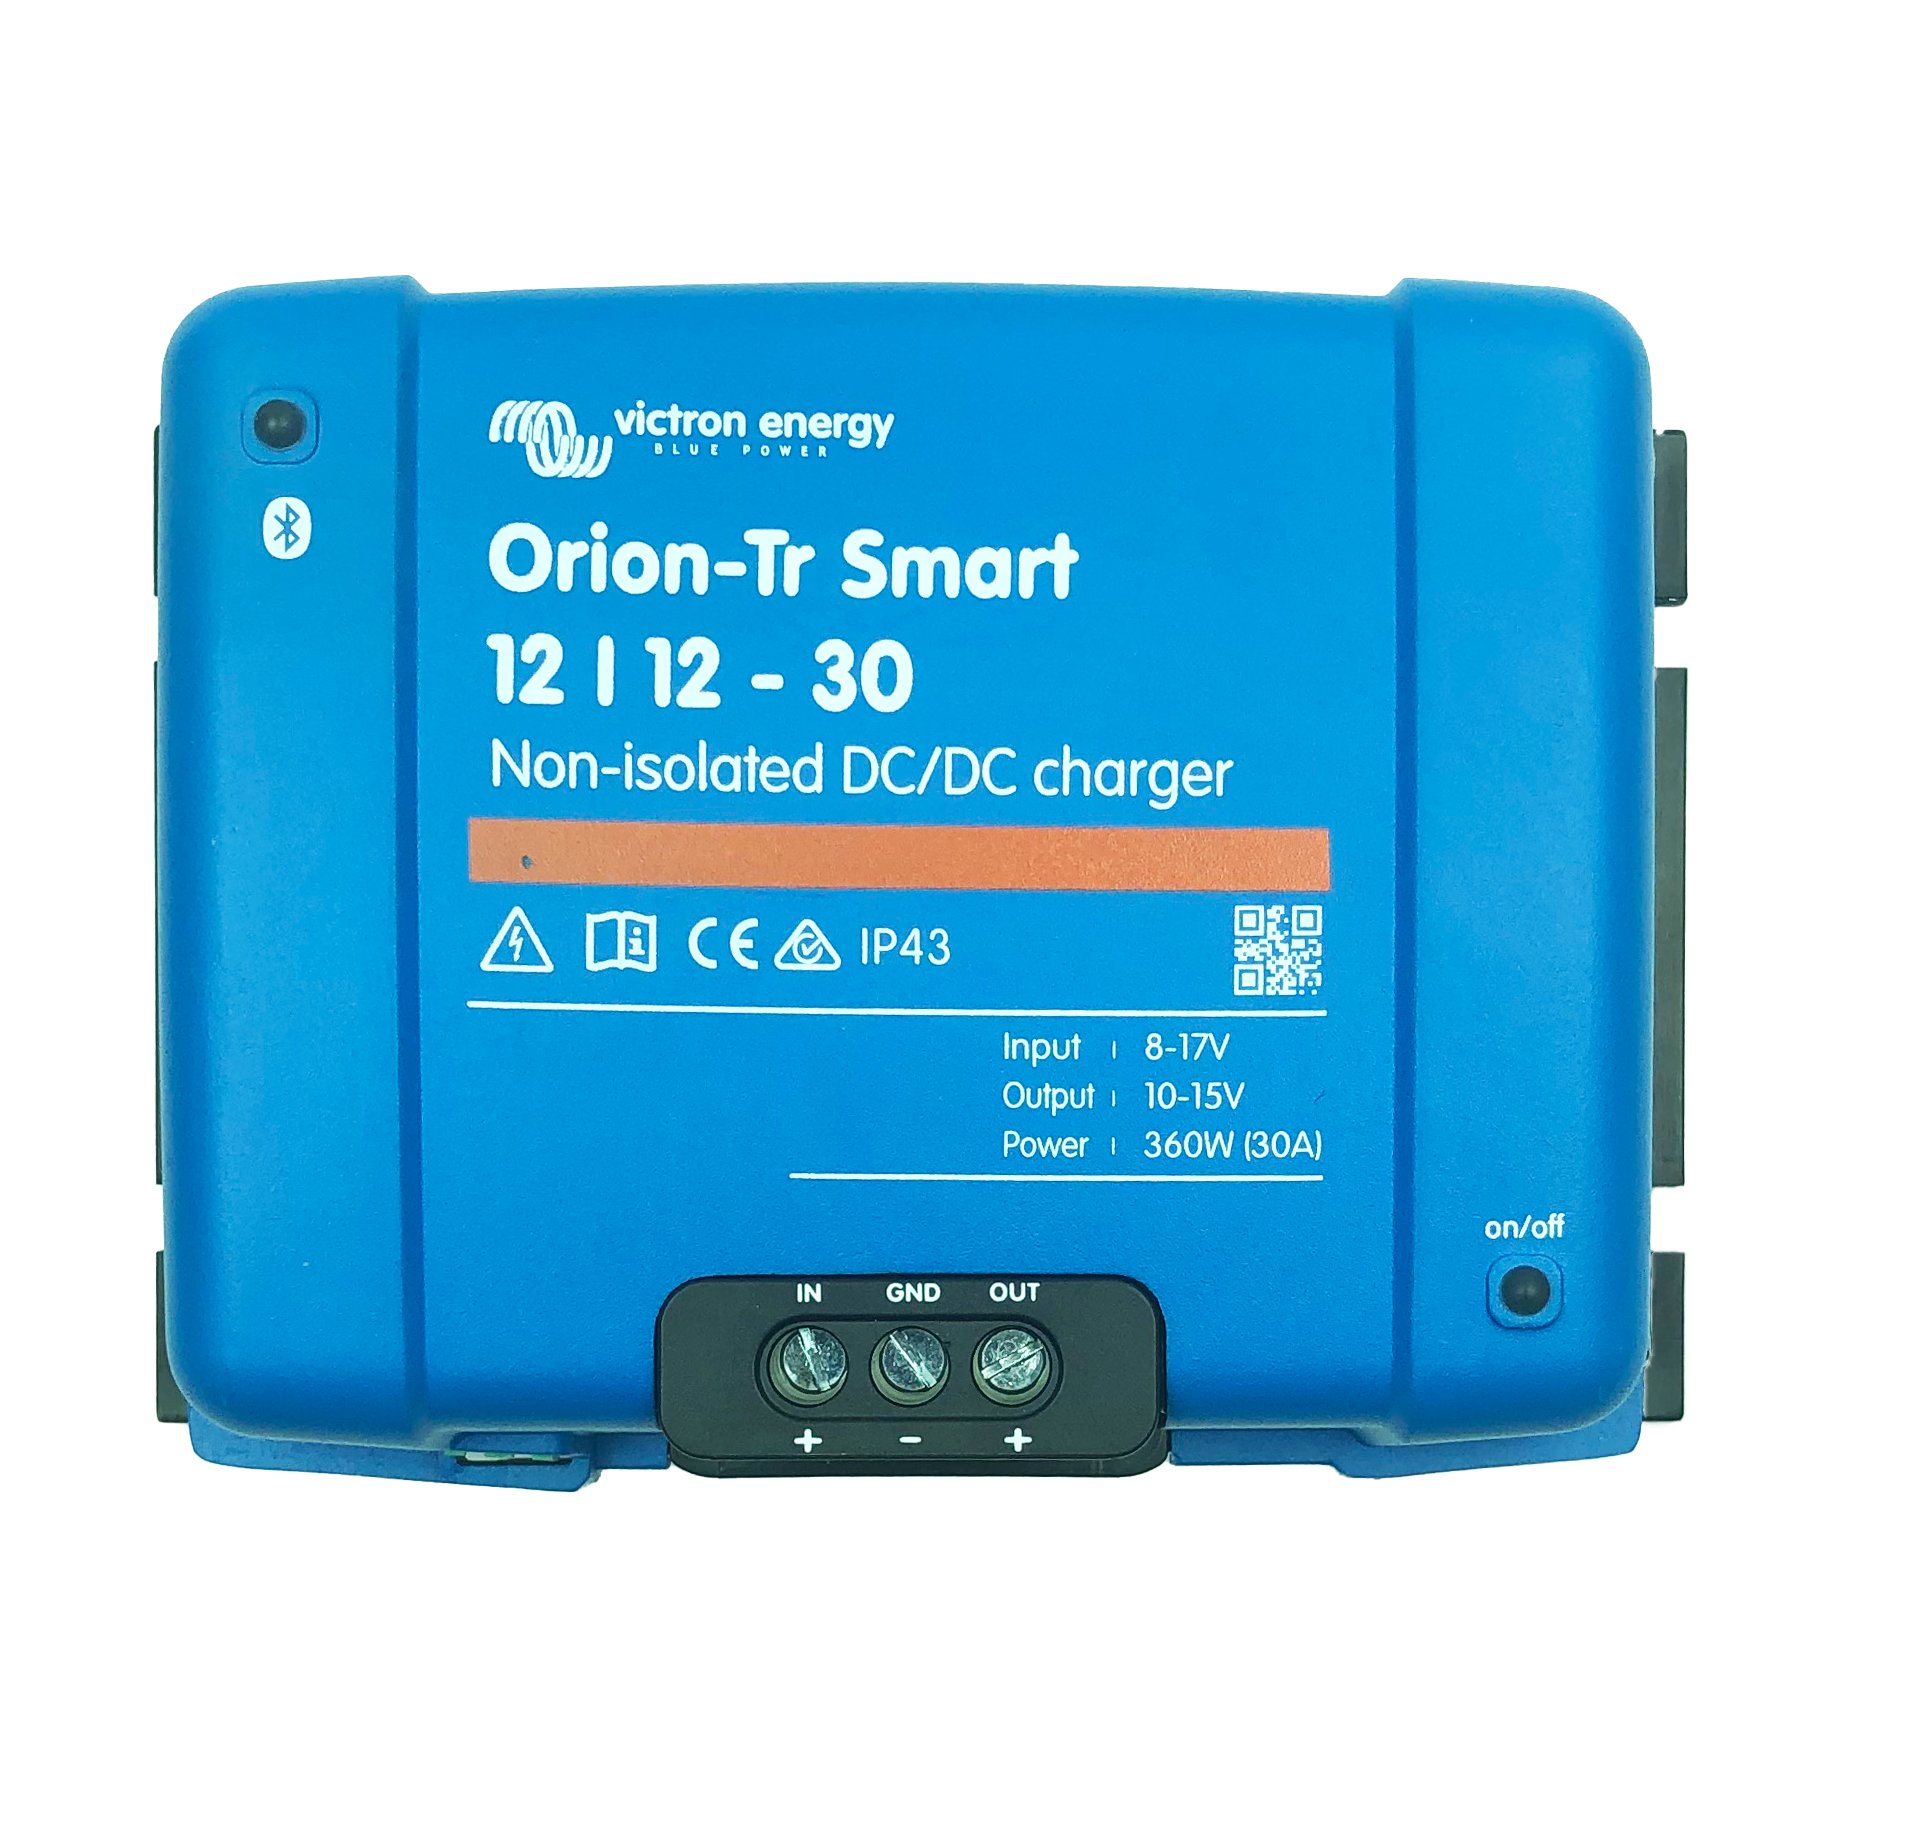 Can I parallel 2 Orion DC DC Chargerts to more rapidly charge the house bank from the start battery?